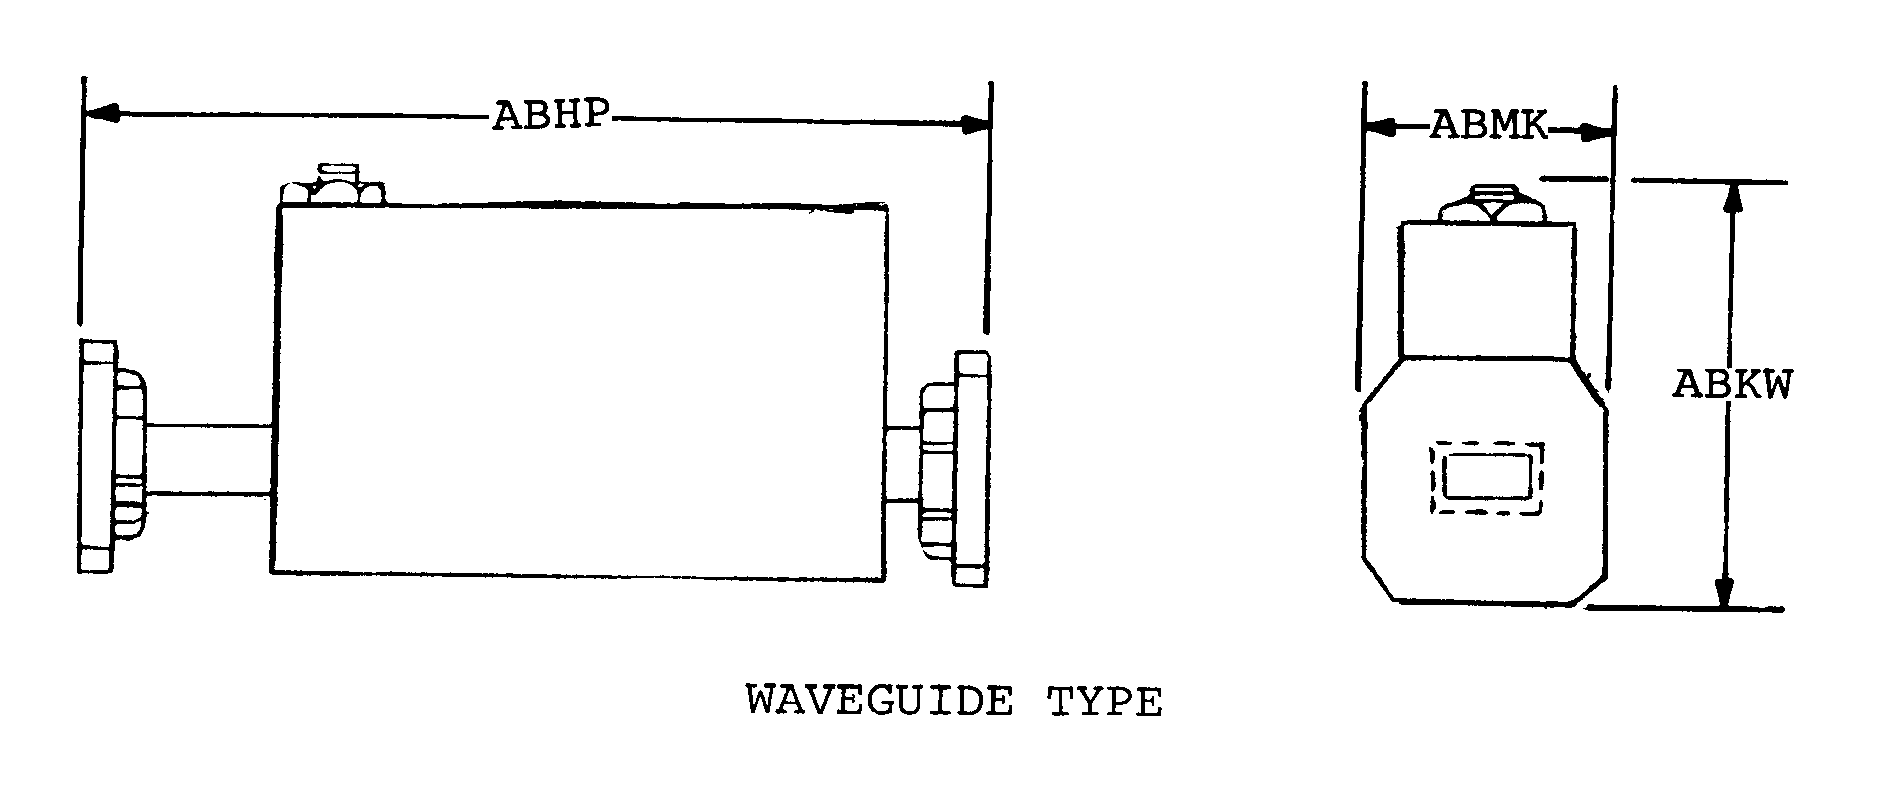 WAVEGUIDE TYPE style nsn 5985-01-579-8099